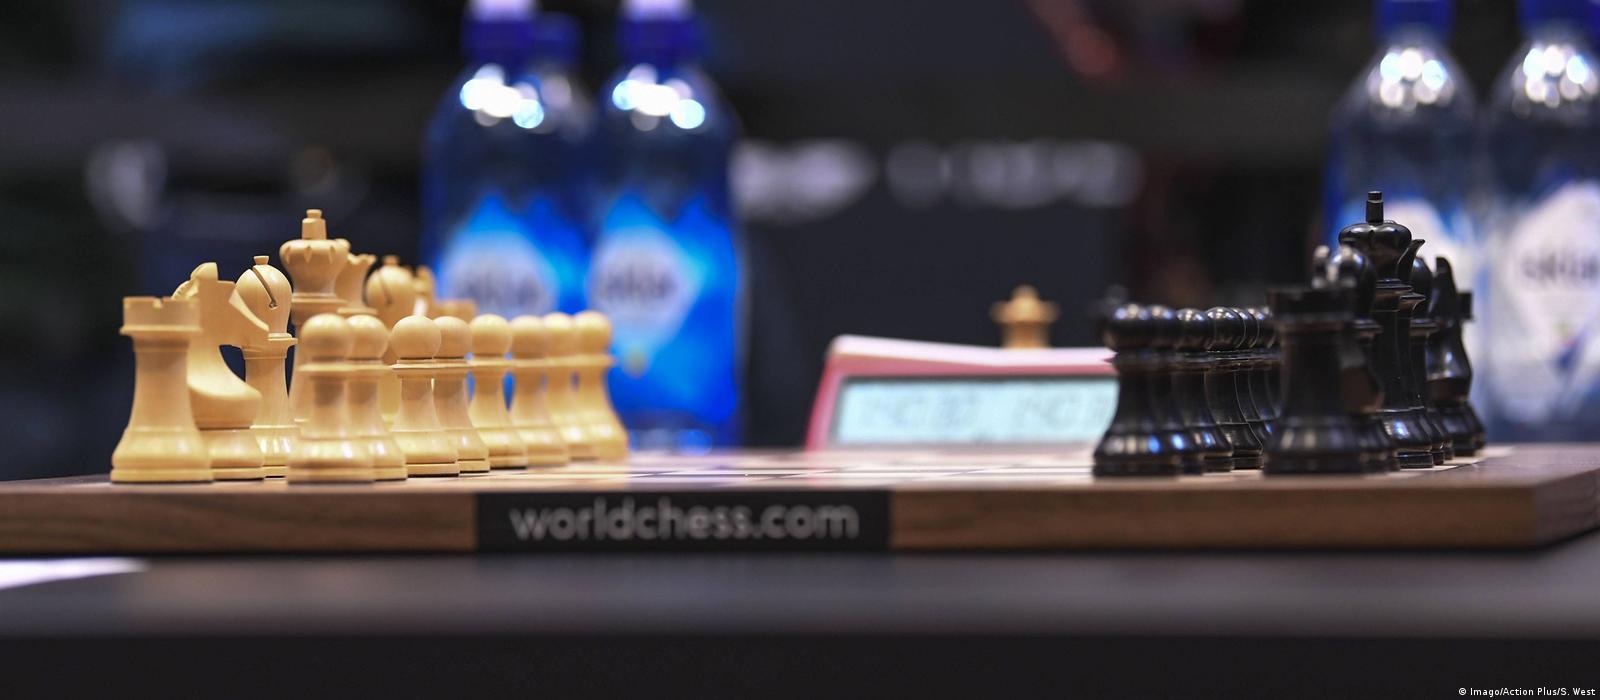 The Stage Is Set for an Epic Finish at the World Chess Championship